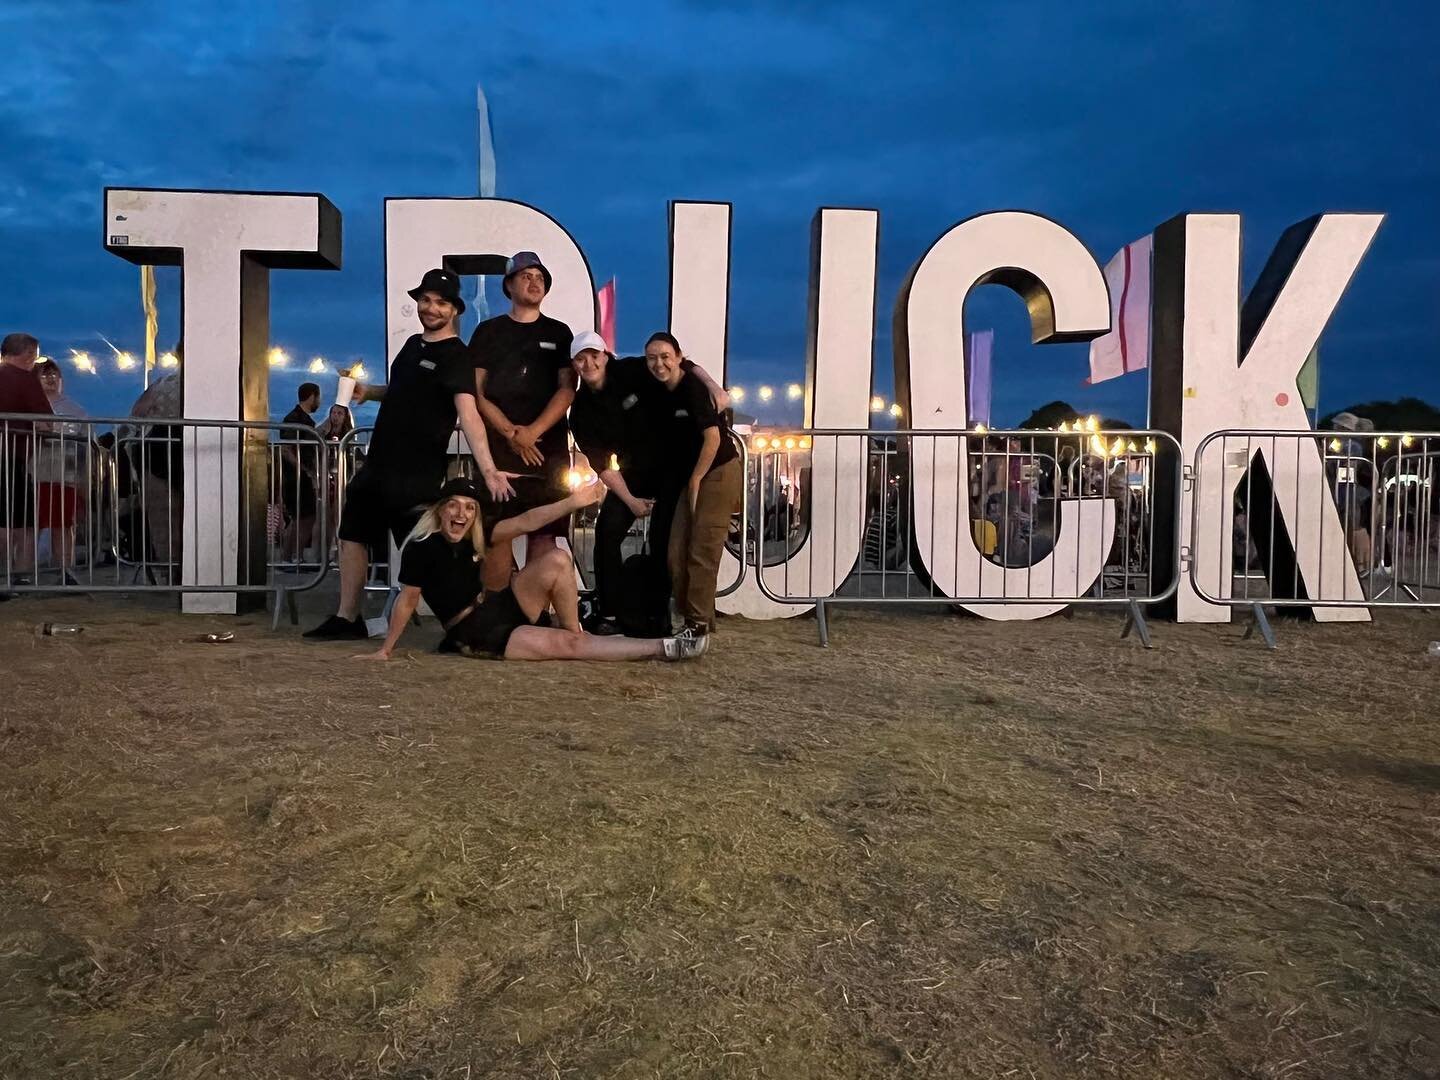 TruckFest you&rsquo;ve been a pleasure! 🎉 -  Over the weekend, our Hinckley &amp; Oxford Benito&rsquo;s team joined together to serve up some delicious Burritos 🌯 &amp; Tacos 🌮 to the festival goers at Truck Fest in Oxfordshire! We hope you all ha